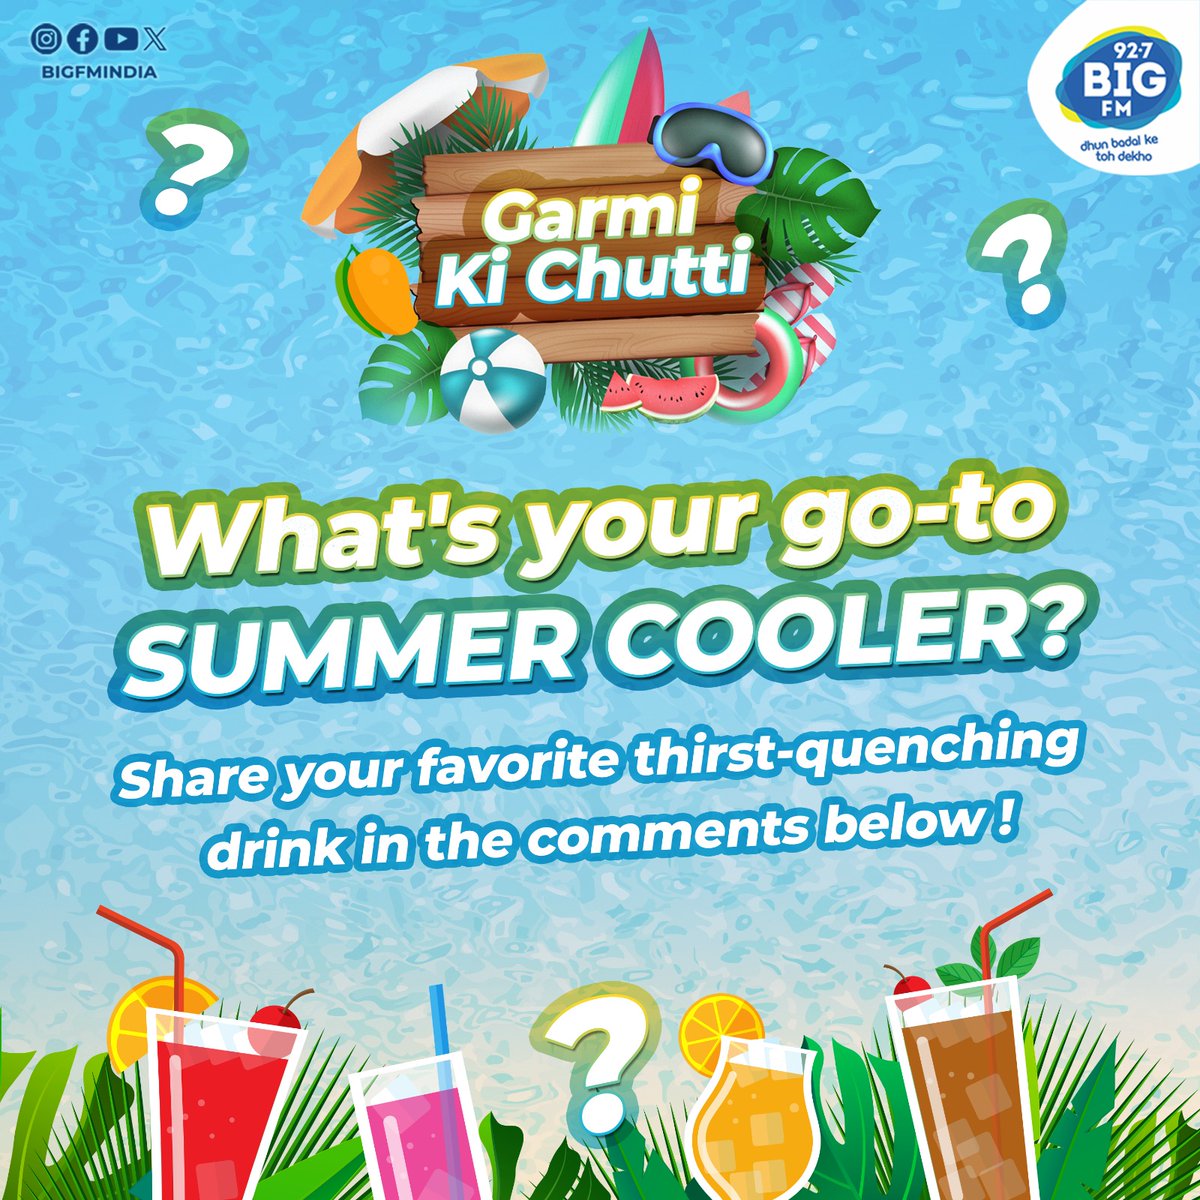 Hey everyone! ☀️🌴 With summer vacation around the corner, it's time to beat the heat together! 🥵 What's your favourite summer drink? 

Comment below and let's share some refreshing ideas! 🍹👇 #SummerVibes #BeatTheHeat #RefreshingDrinks